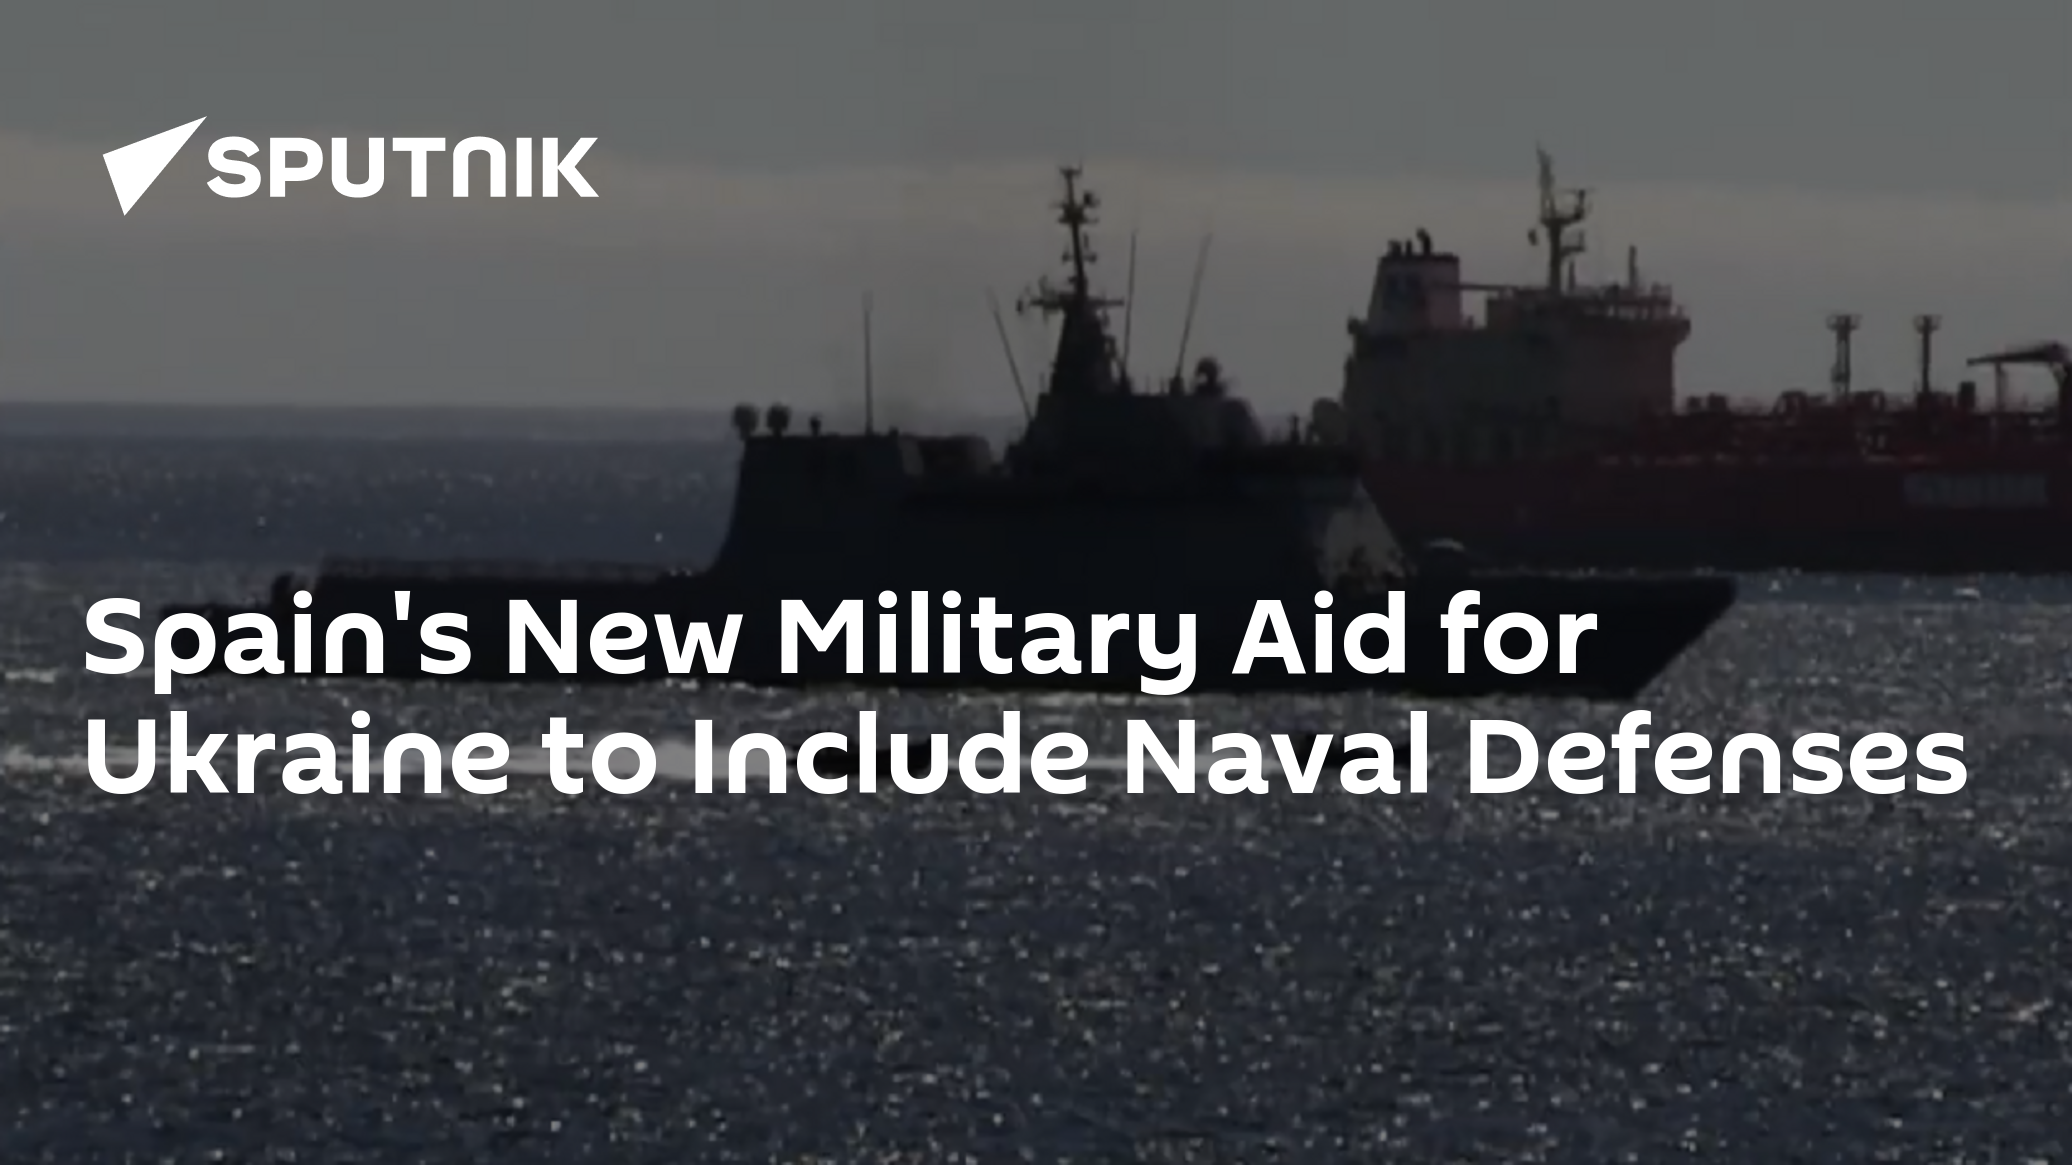 Spain's New Military Aid for Ukraine to Include Naval Defenses